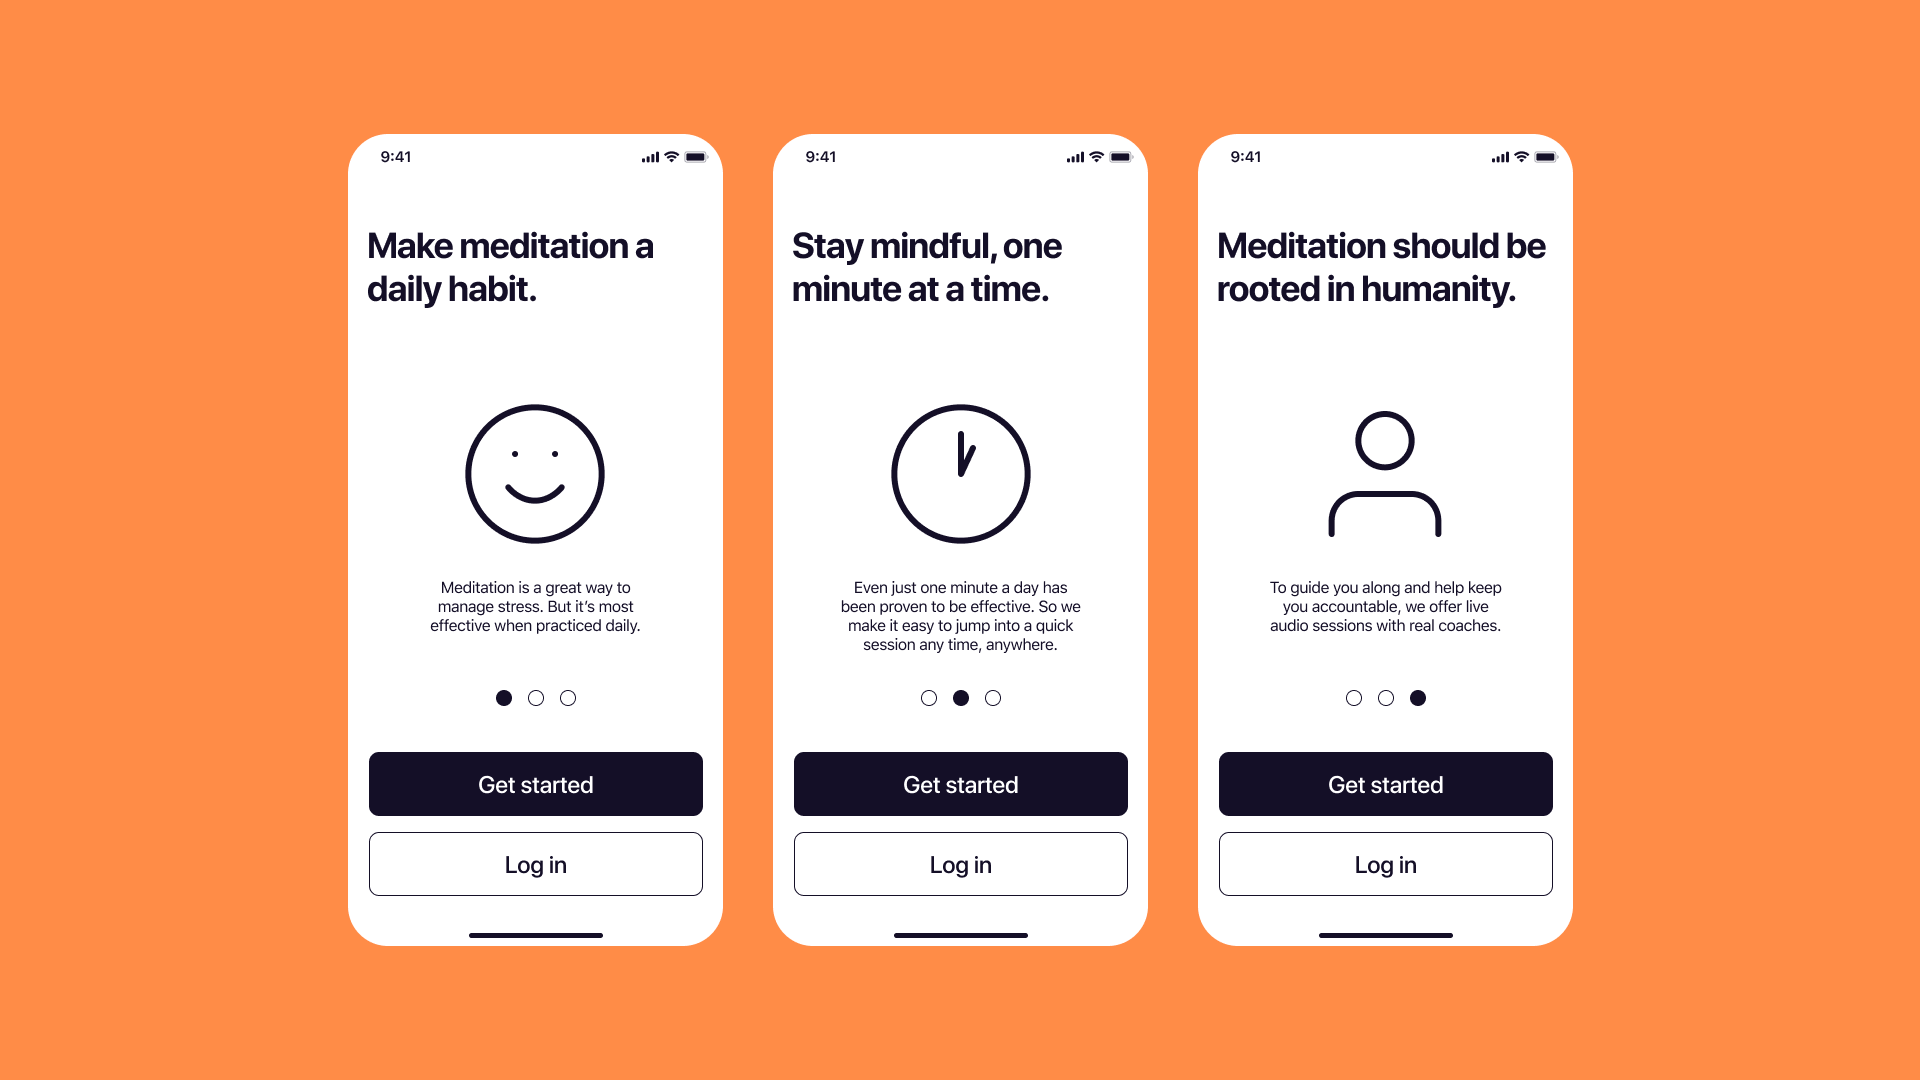 The first three screens of from the app with large buttons labelled 'Get started' and 'Log in' at the bottom. A the top on page 1) 'Make meditation a daily habit' and a smiley face icon, page 2) 'Stay mindful, one minute at a time' and a clock icon, page 3) 'Meditation should be rooted in humanity' and a person icon.